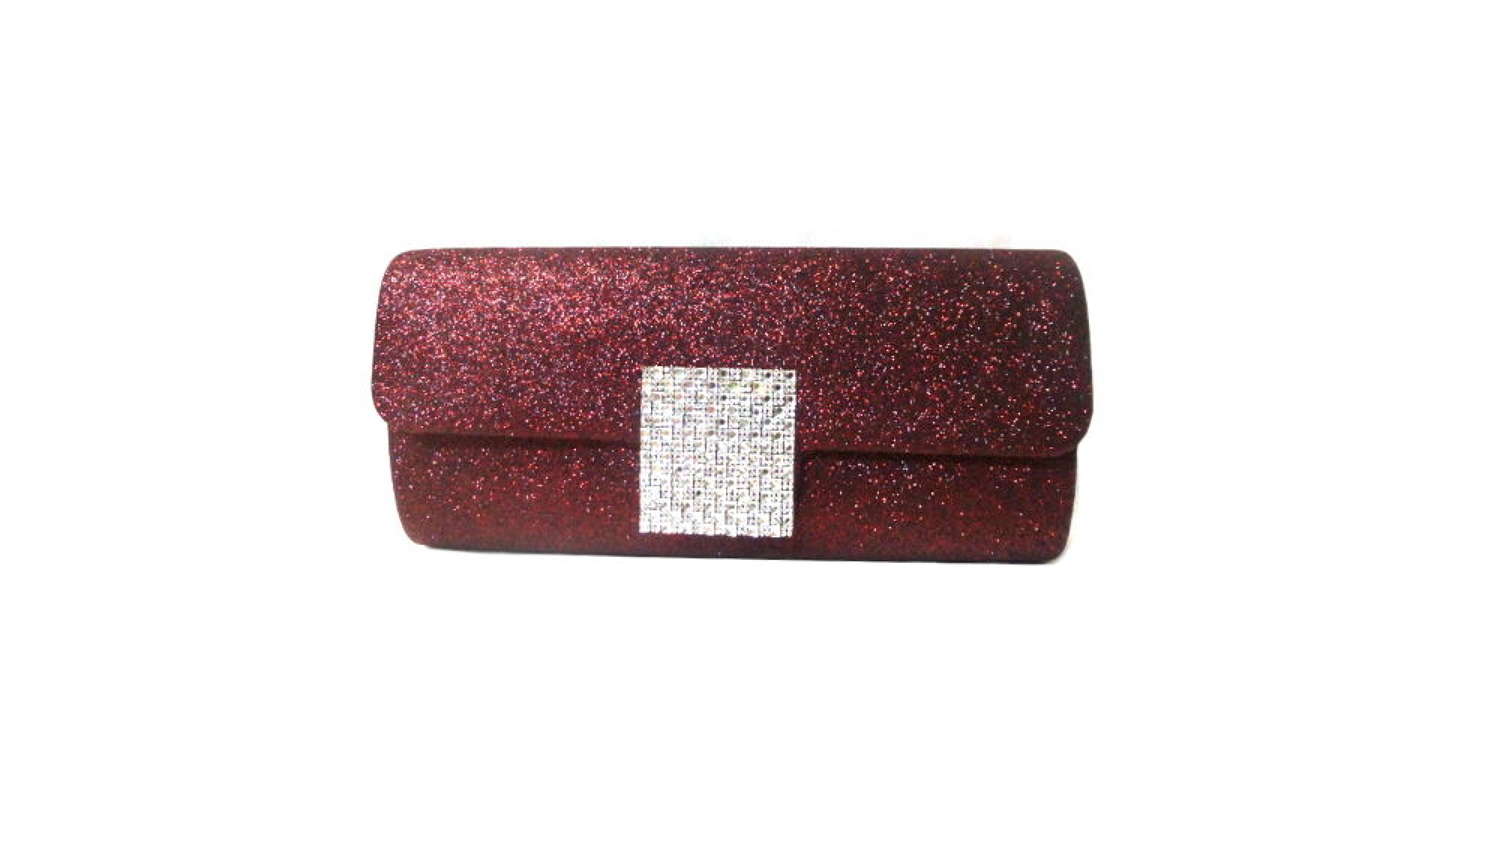 Glittery burgundy evening bag with diamante detail.